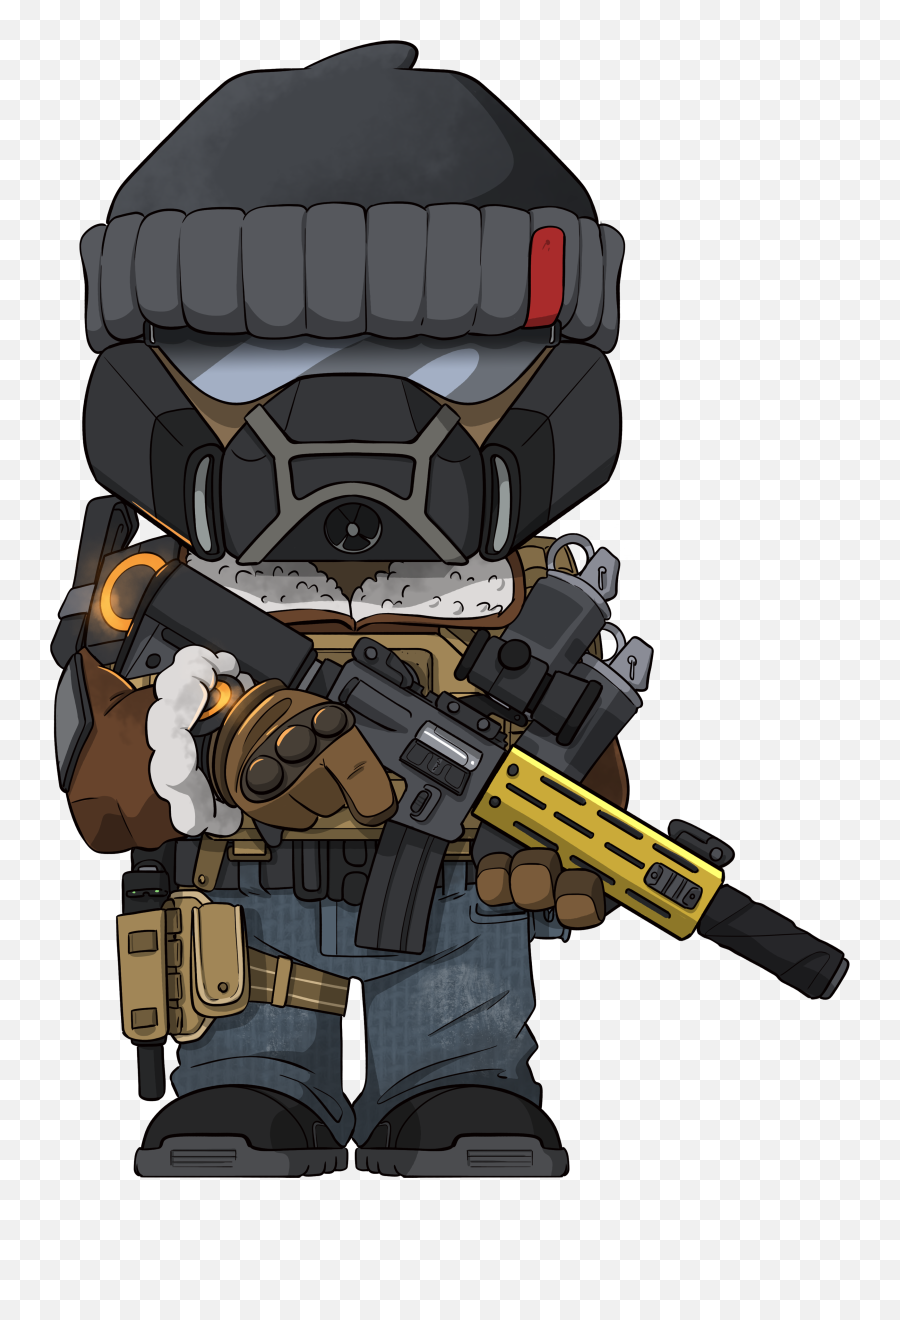 180 Tactical Teddies Ideas In 2021 - Fictional Character Emoji,Sniper Rifle Emoticon